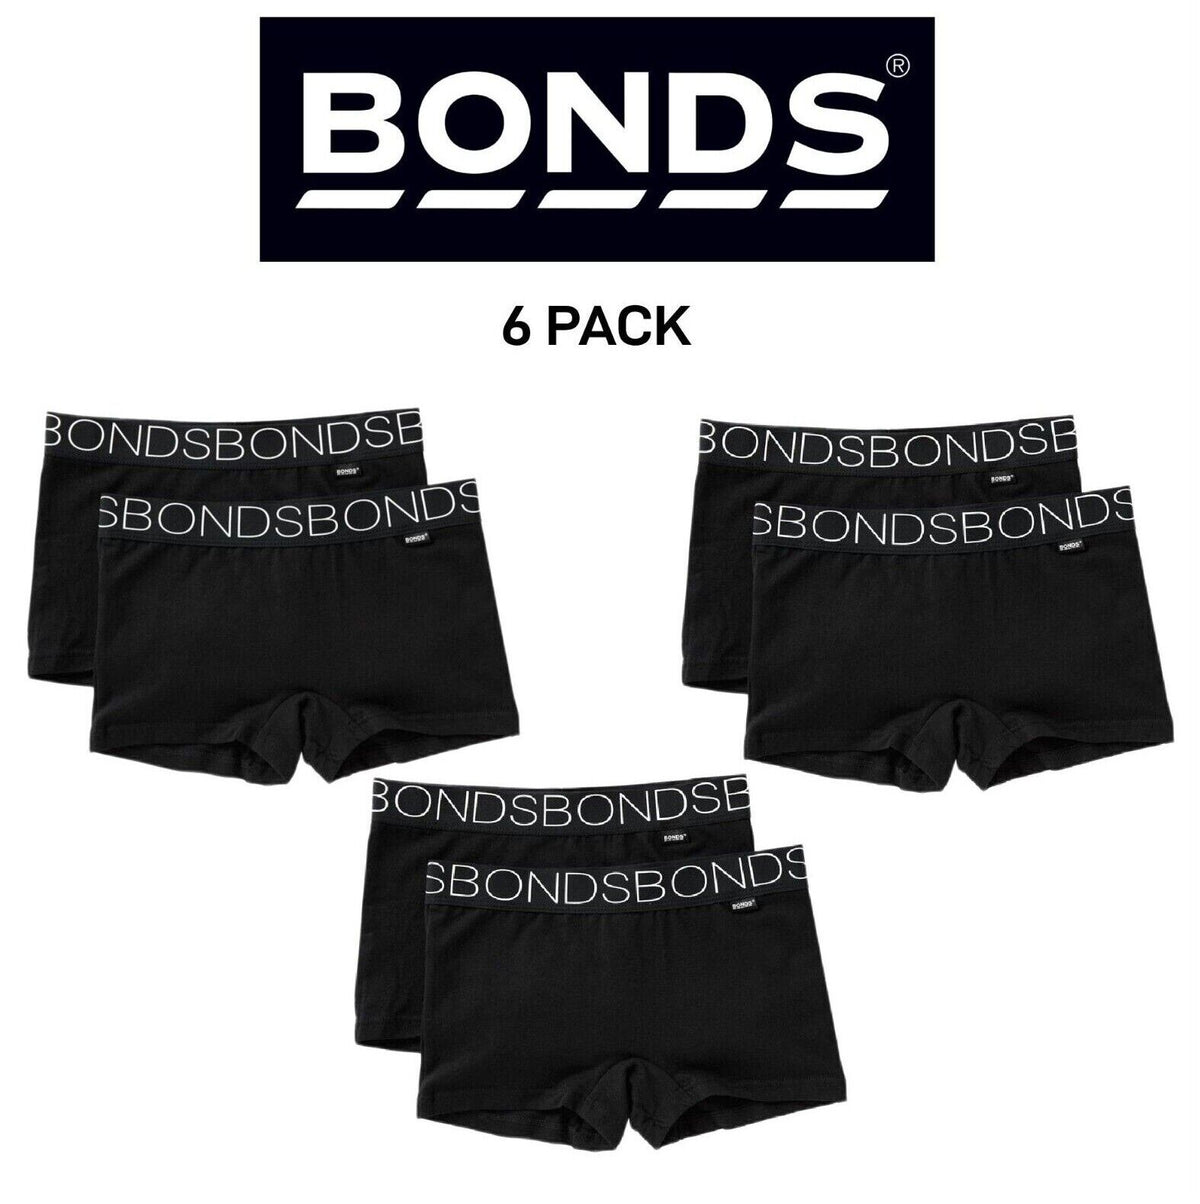 Bonds Girls Stretchies Shorties Brief Soft Cotton Comfortable 6 Pack UXVD2A